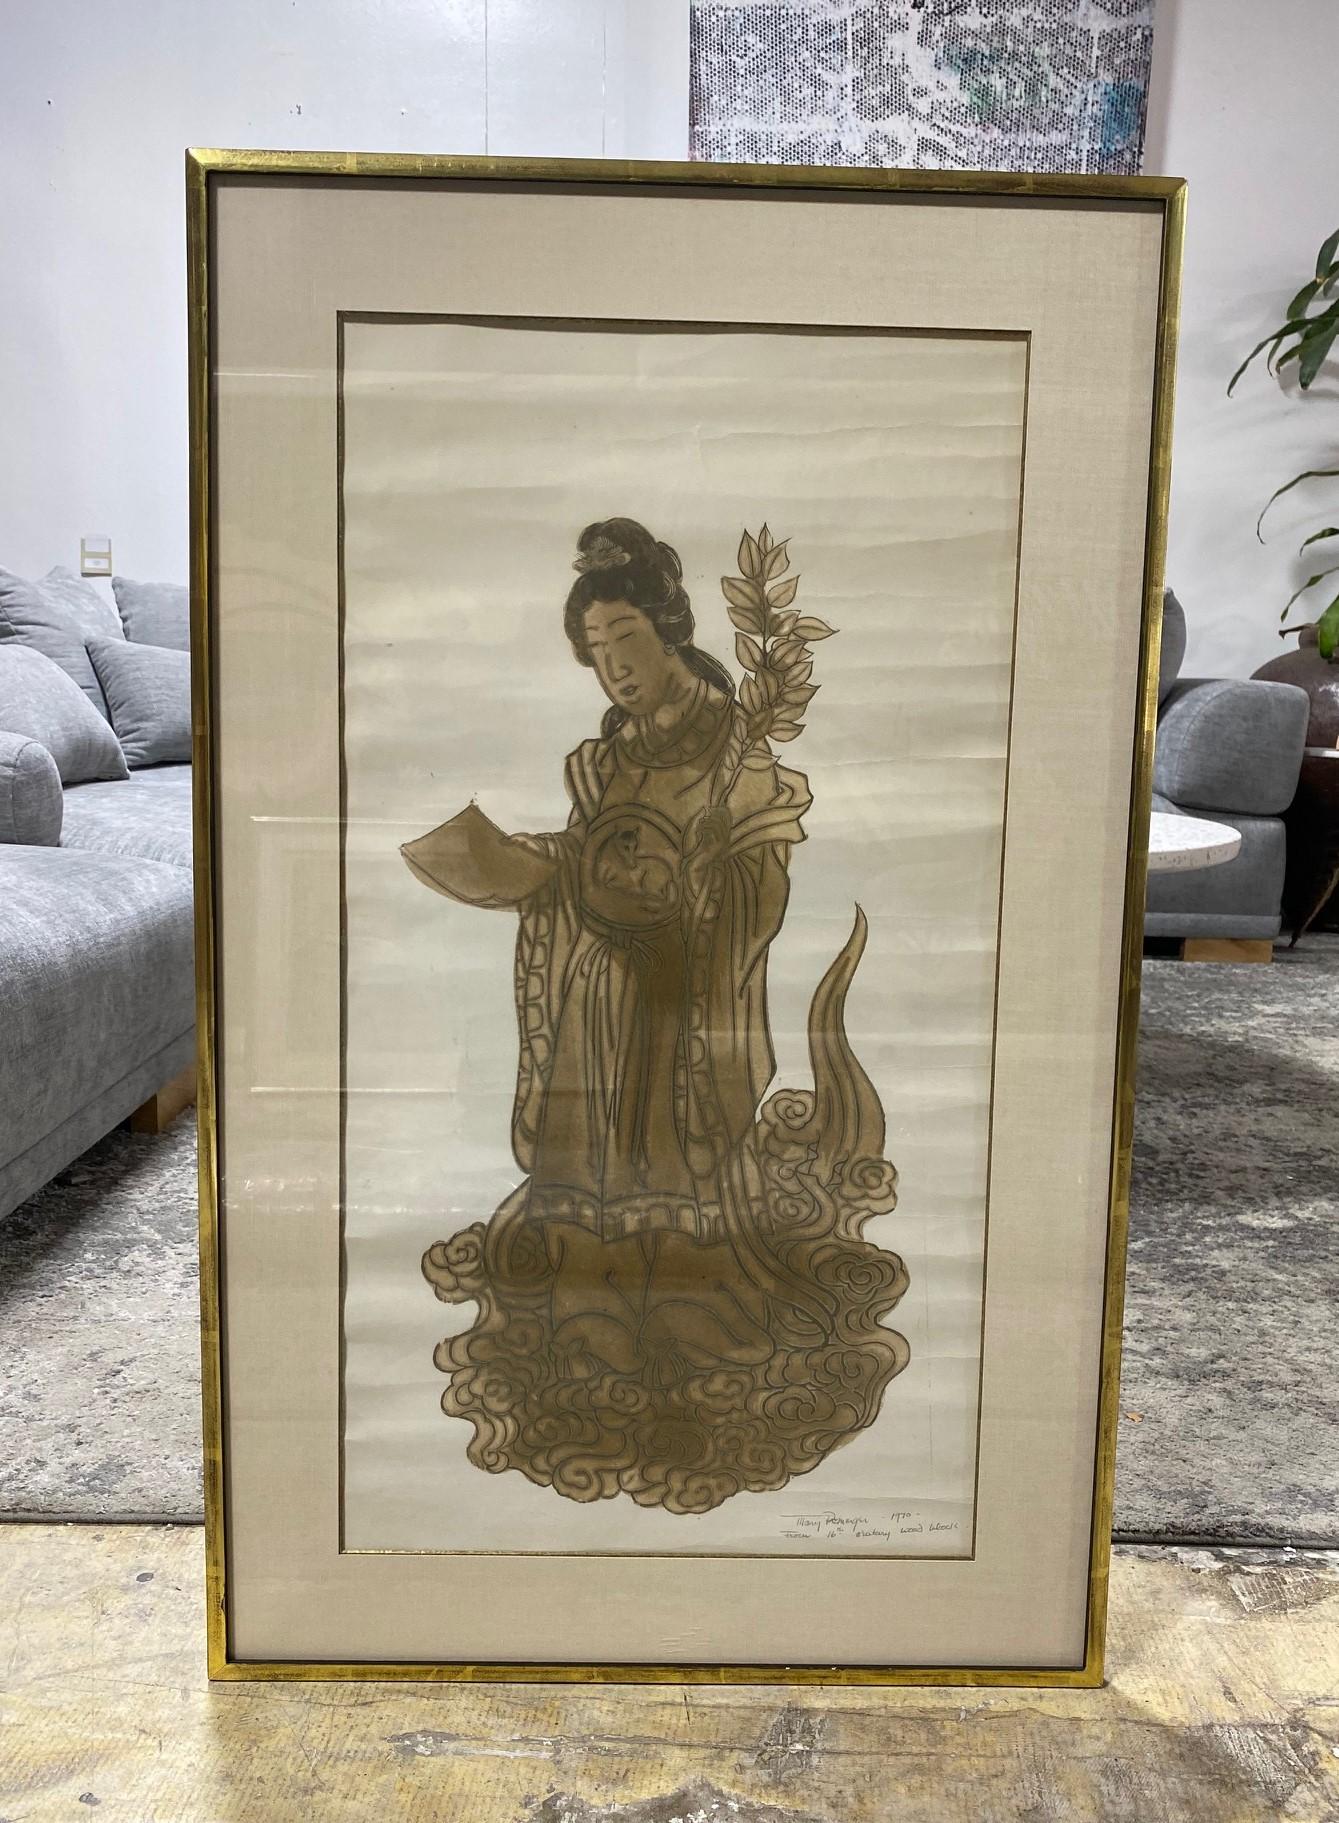 A quite beautiful and very rare print by American artist Mary Gardner Preminger (who at one time was married to renowned theatre and film director Otto Preminger). 

This work is based on a 16th century Asian woodblock (as noted in the lower